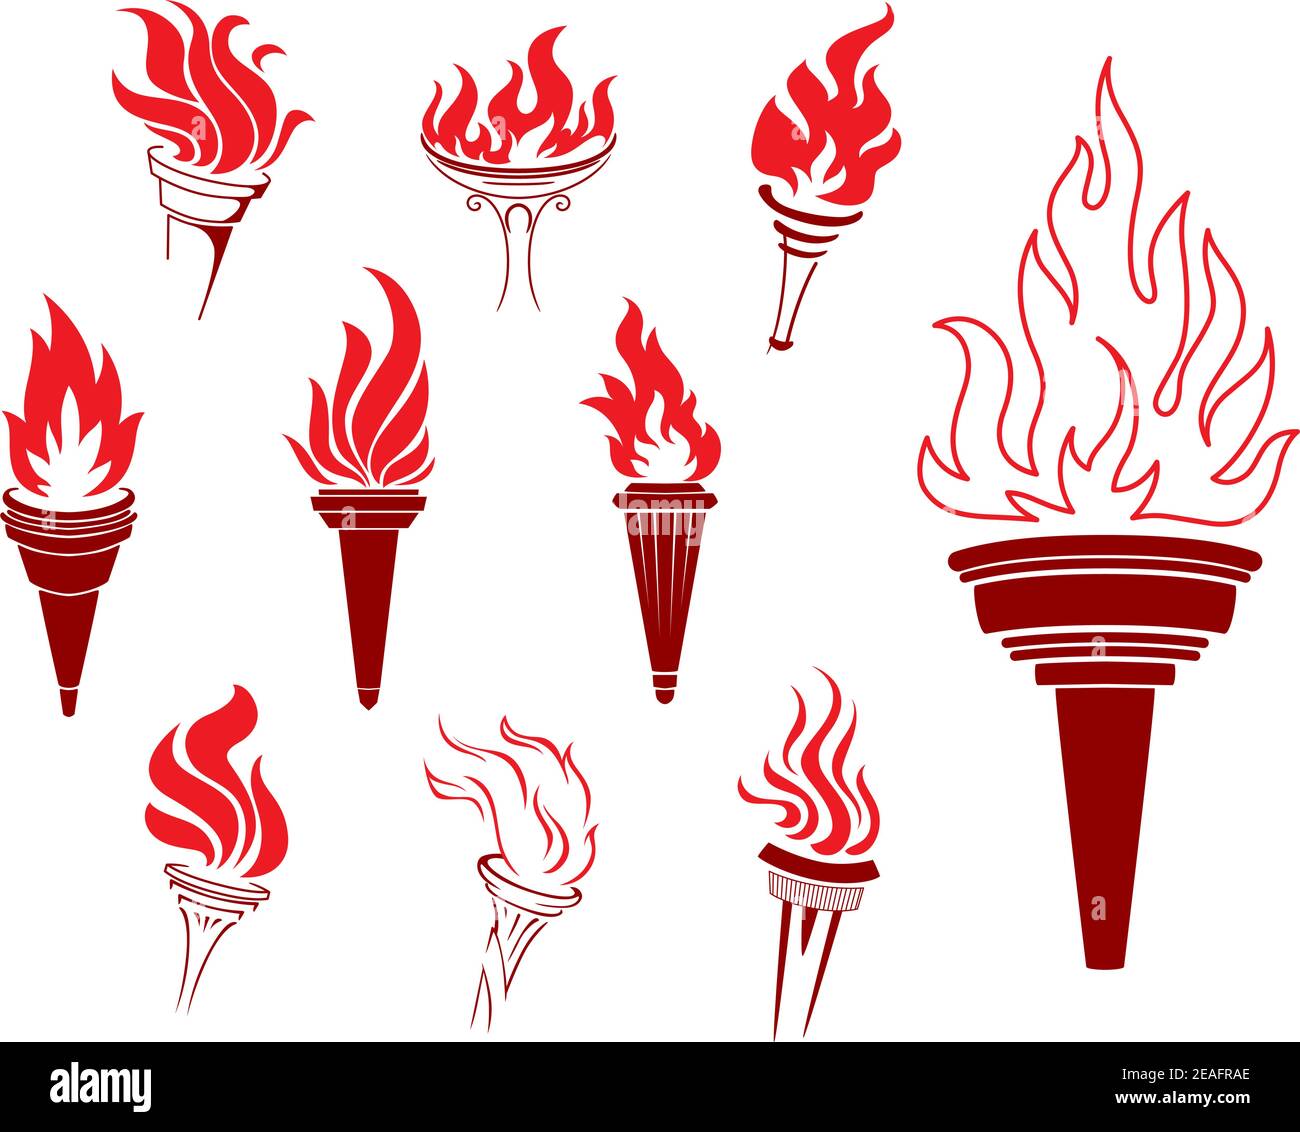 Collection of burning torches with flames in different shaped and sized sconces suitable as design elements Stock Vector